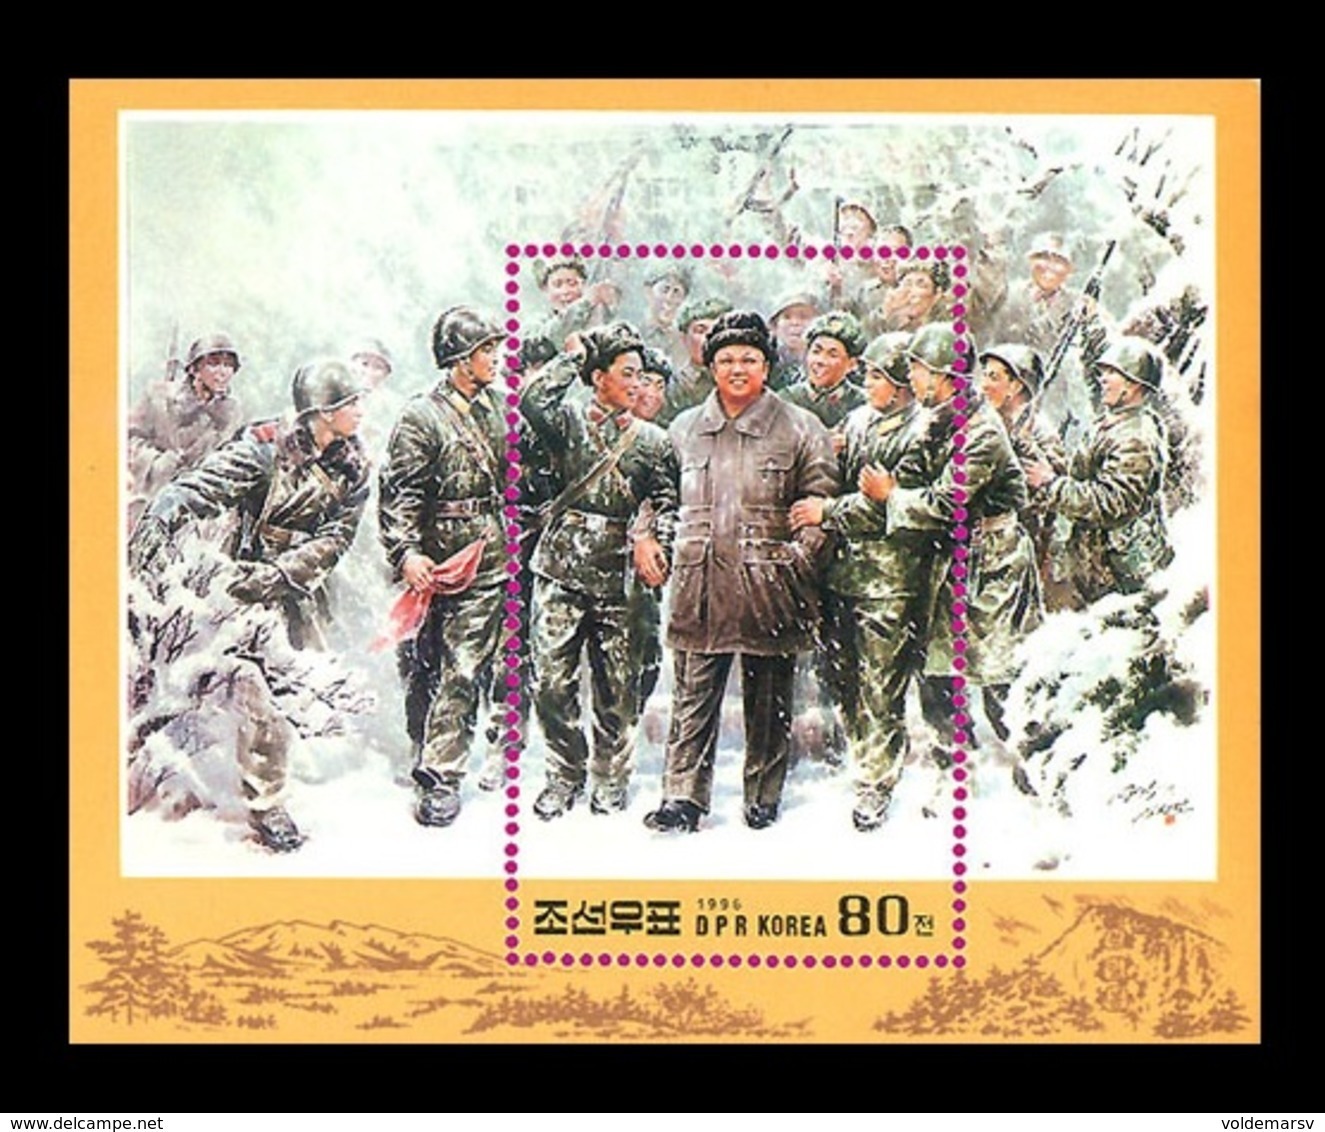 North Korea 1996 Mih. 3805 (Bl.343) Kim Jong Il Visiting The Soldiers Of The Korean People's Army On The New Year MNH ** - Corée Du Nord